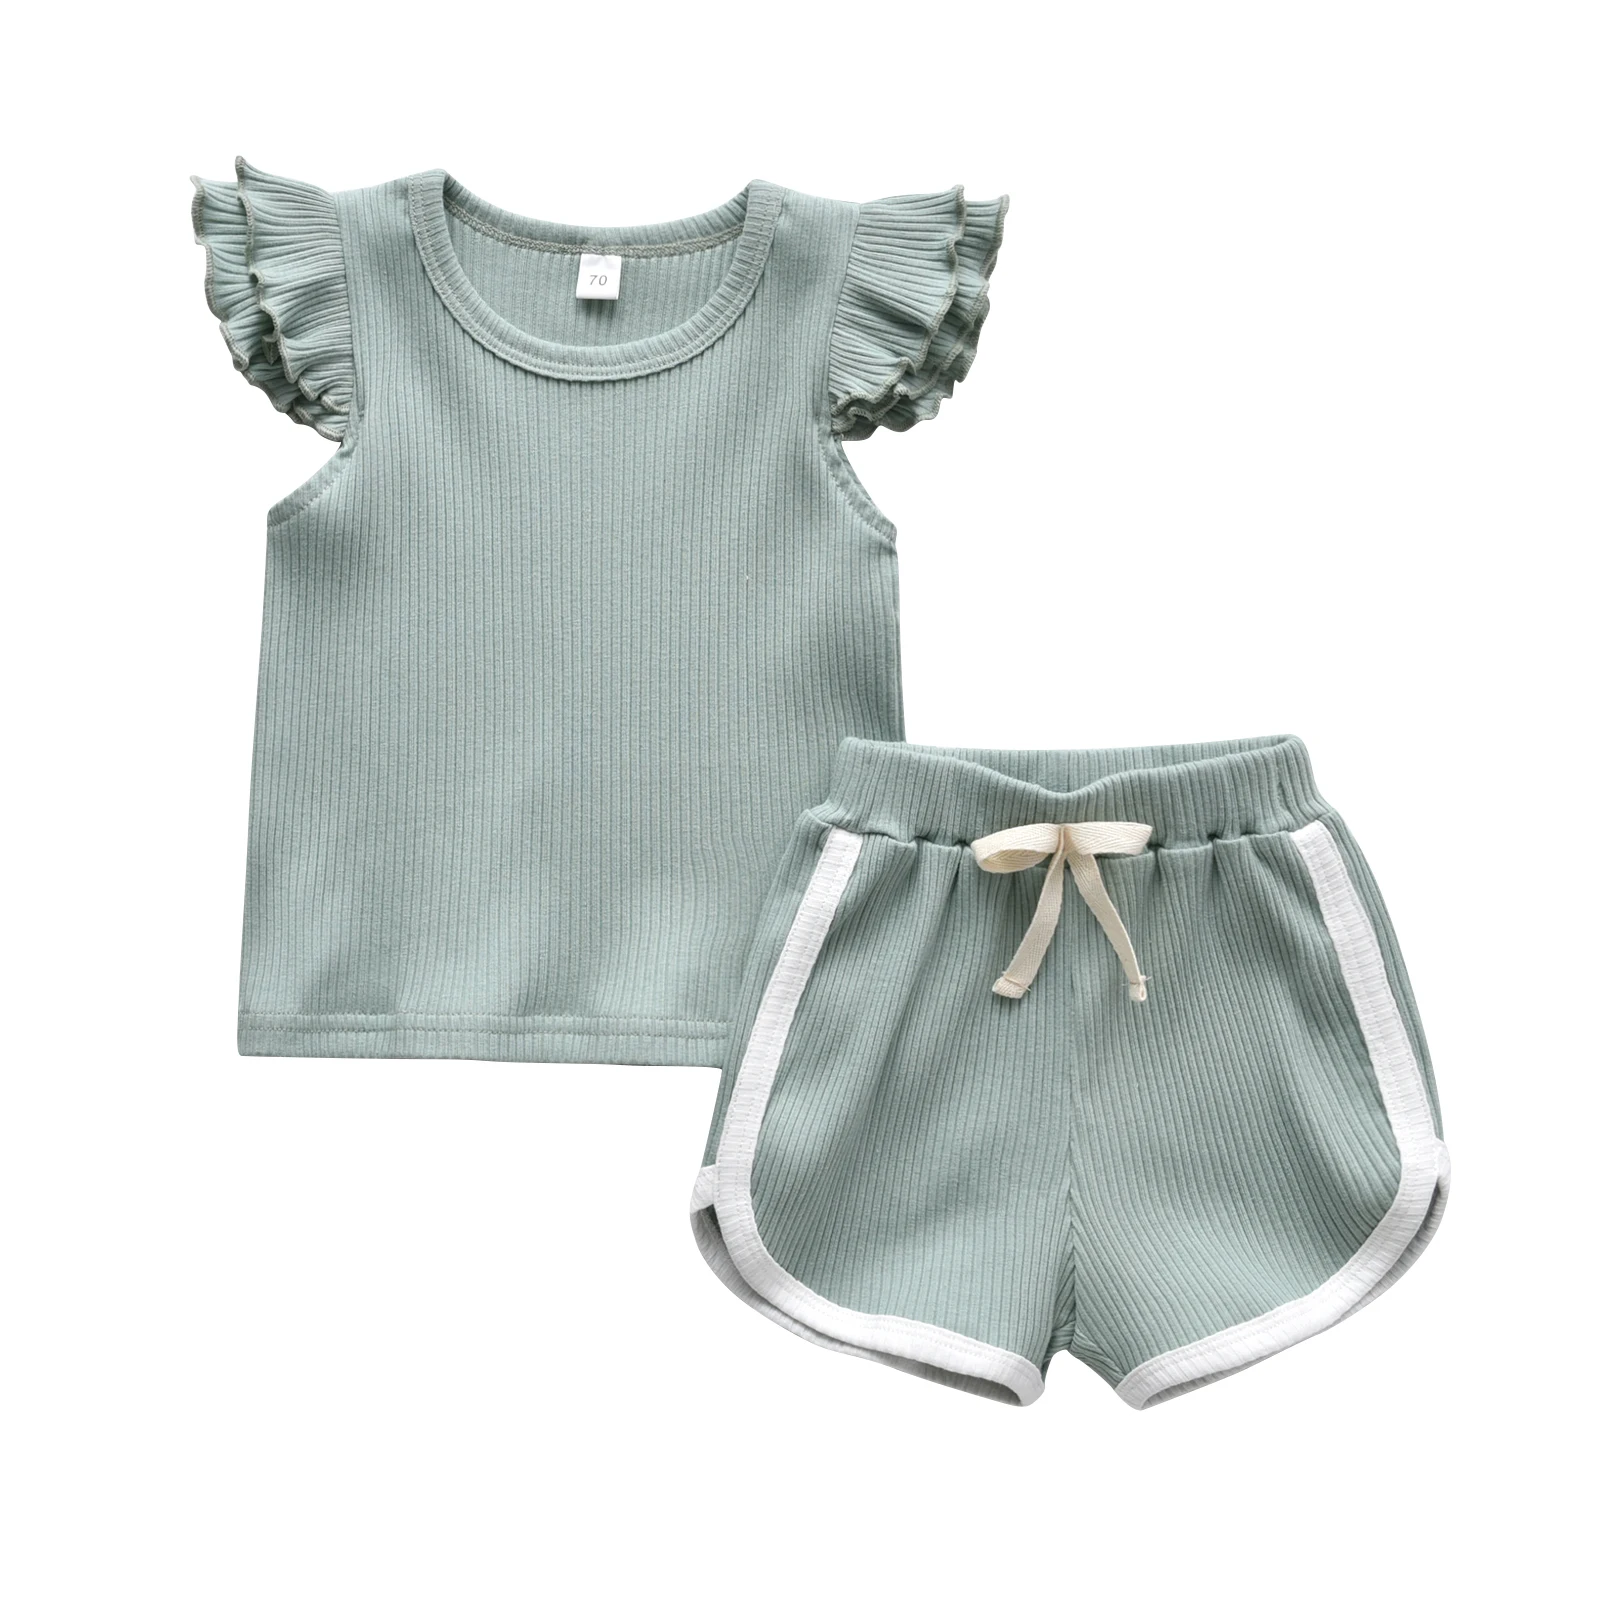 Baby Clothing Set expensive Summer Baby Girl Clothes Set Short Sleeve Solid Color O Neck T-shirt Top and Shorts Pants Knit Two Piece Set Kids Girls Outfits baby clothing set long sleeve	